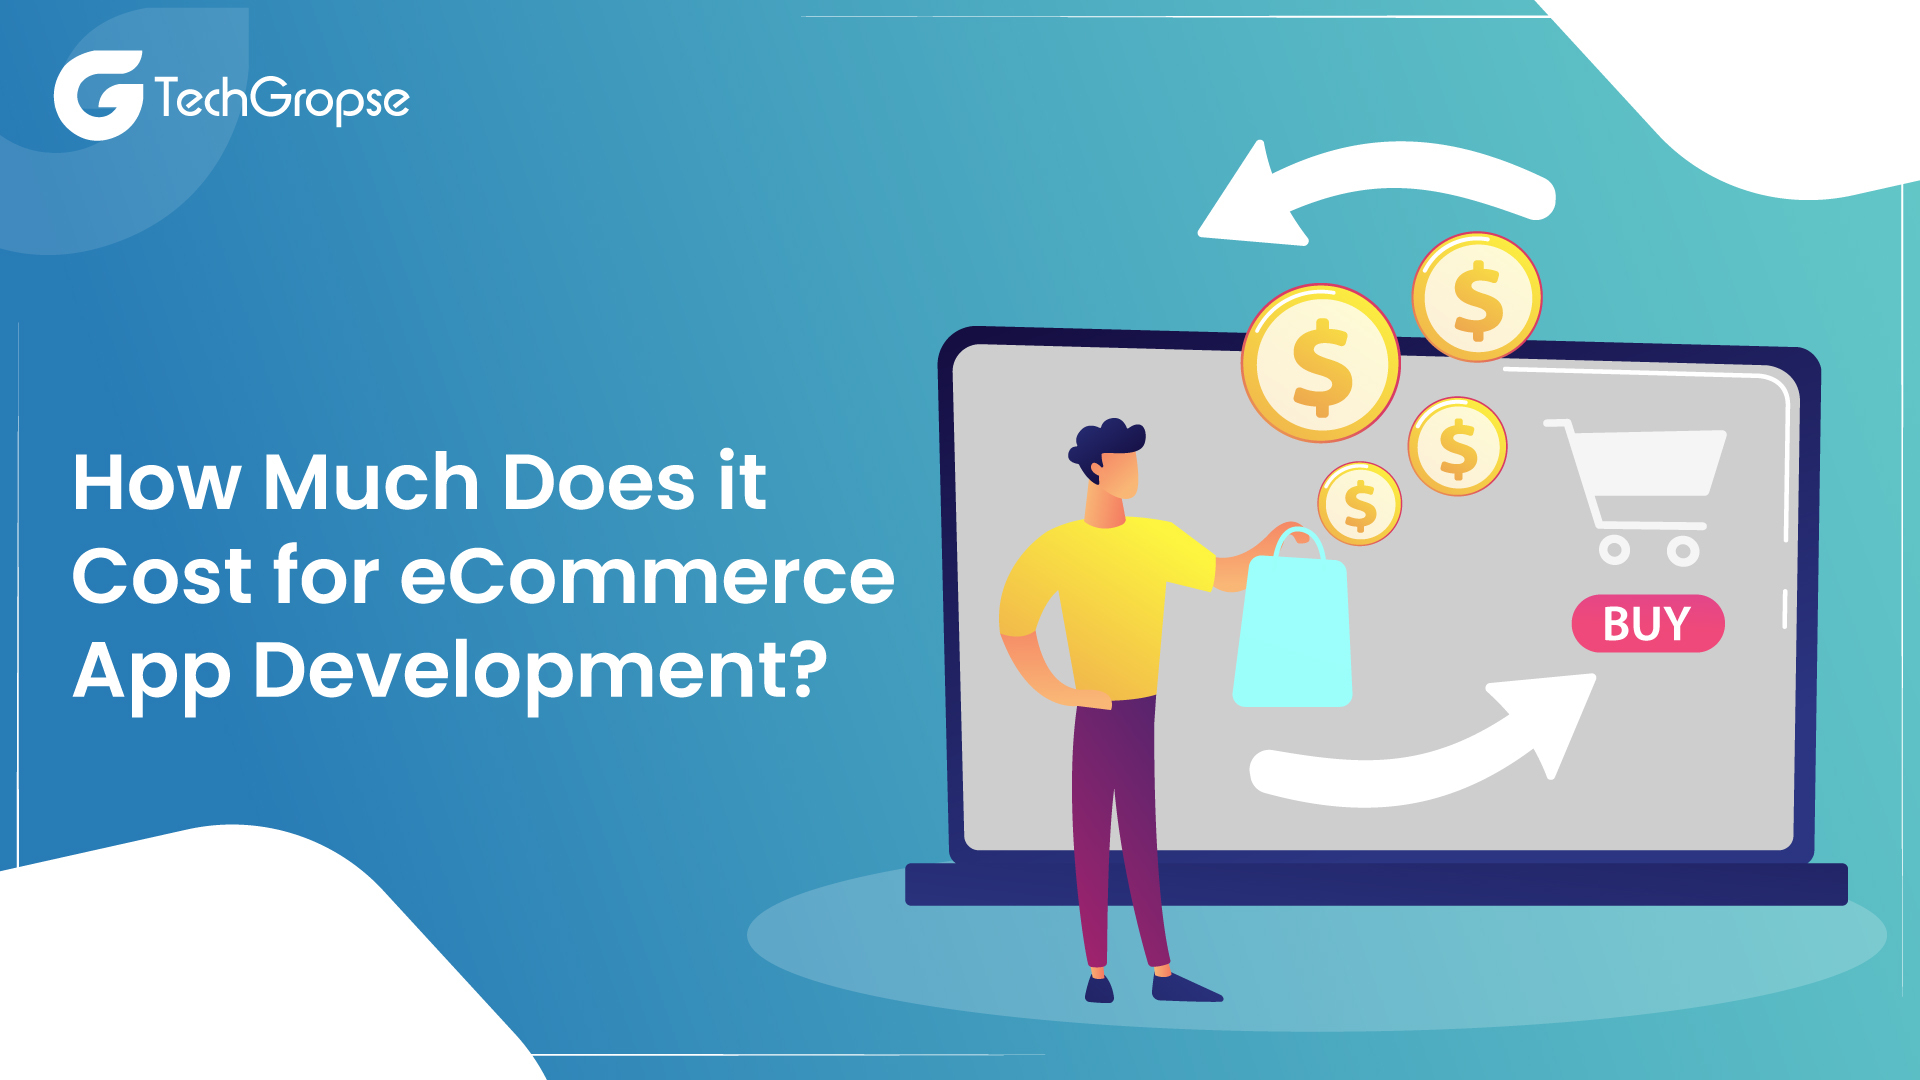 How Much Does it Cost for eCommerce App Development?